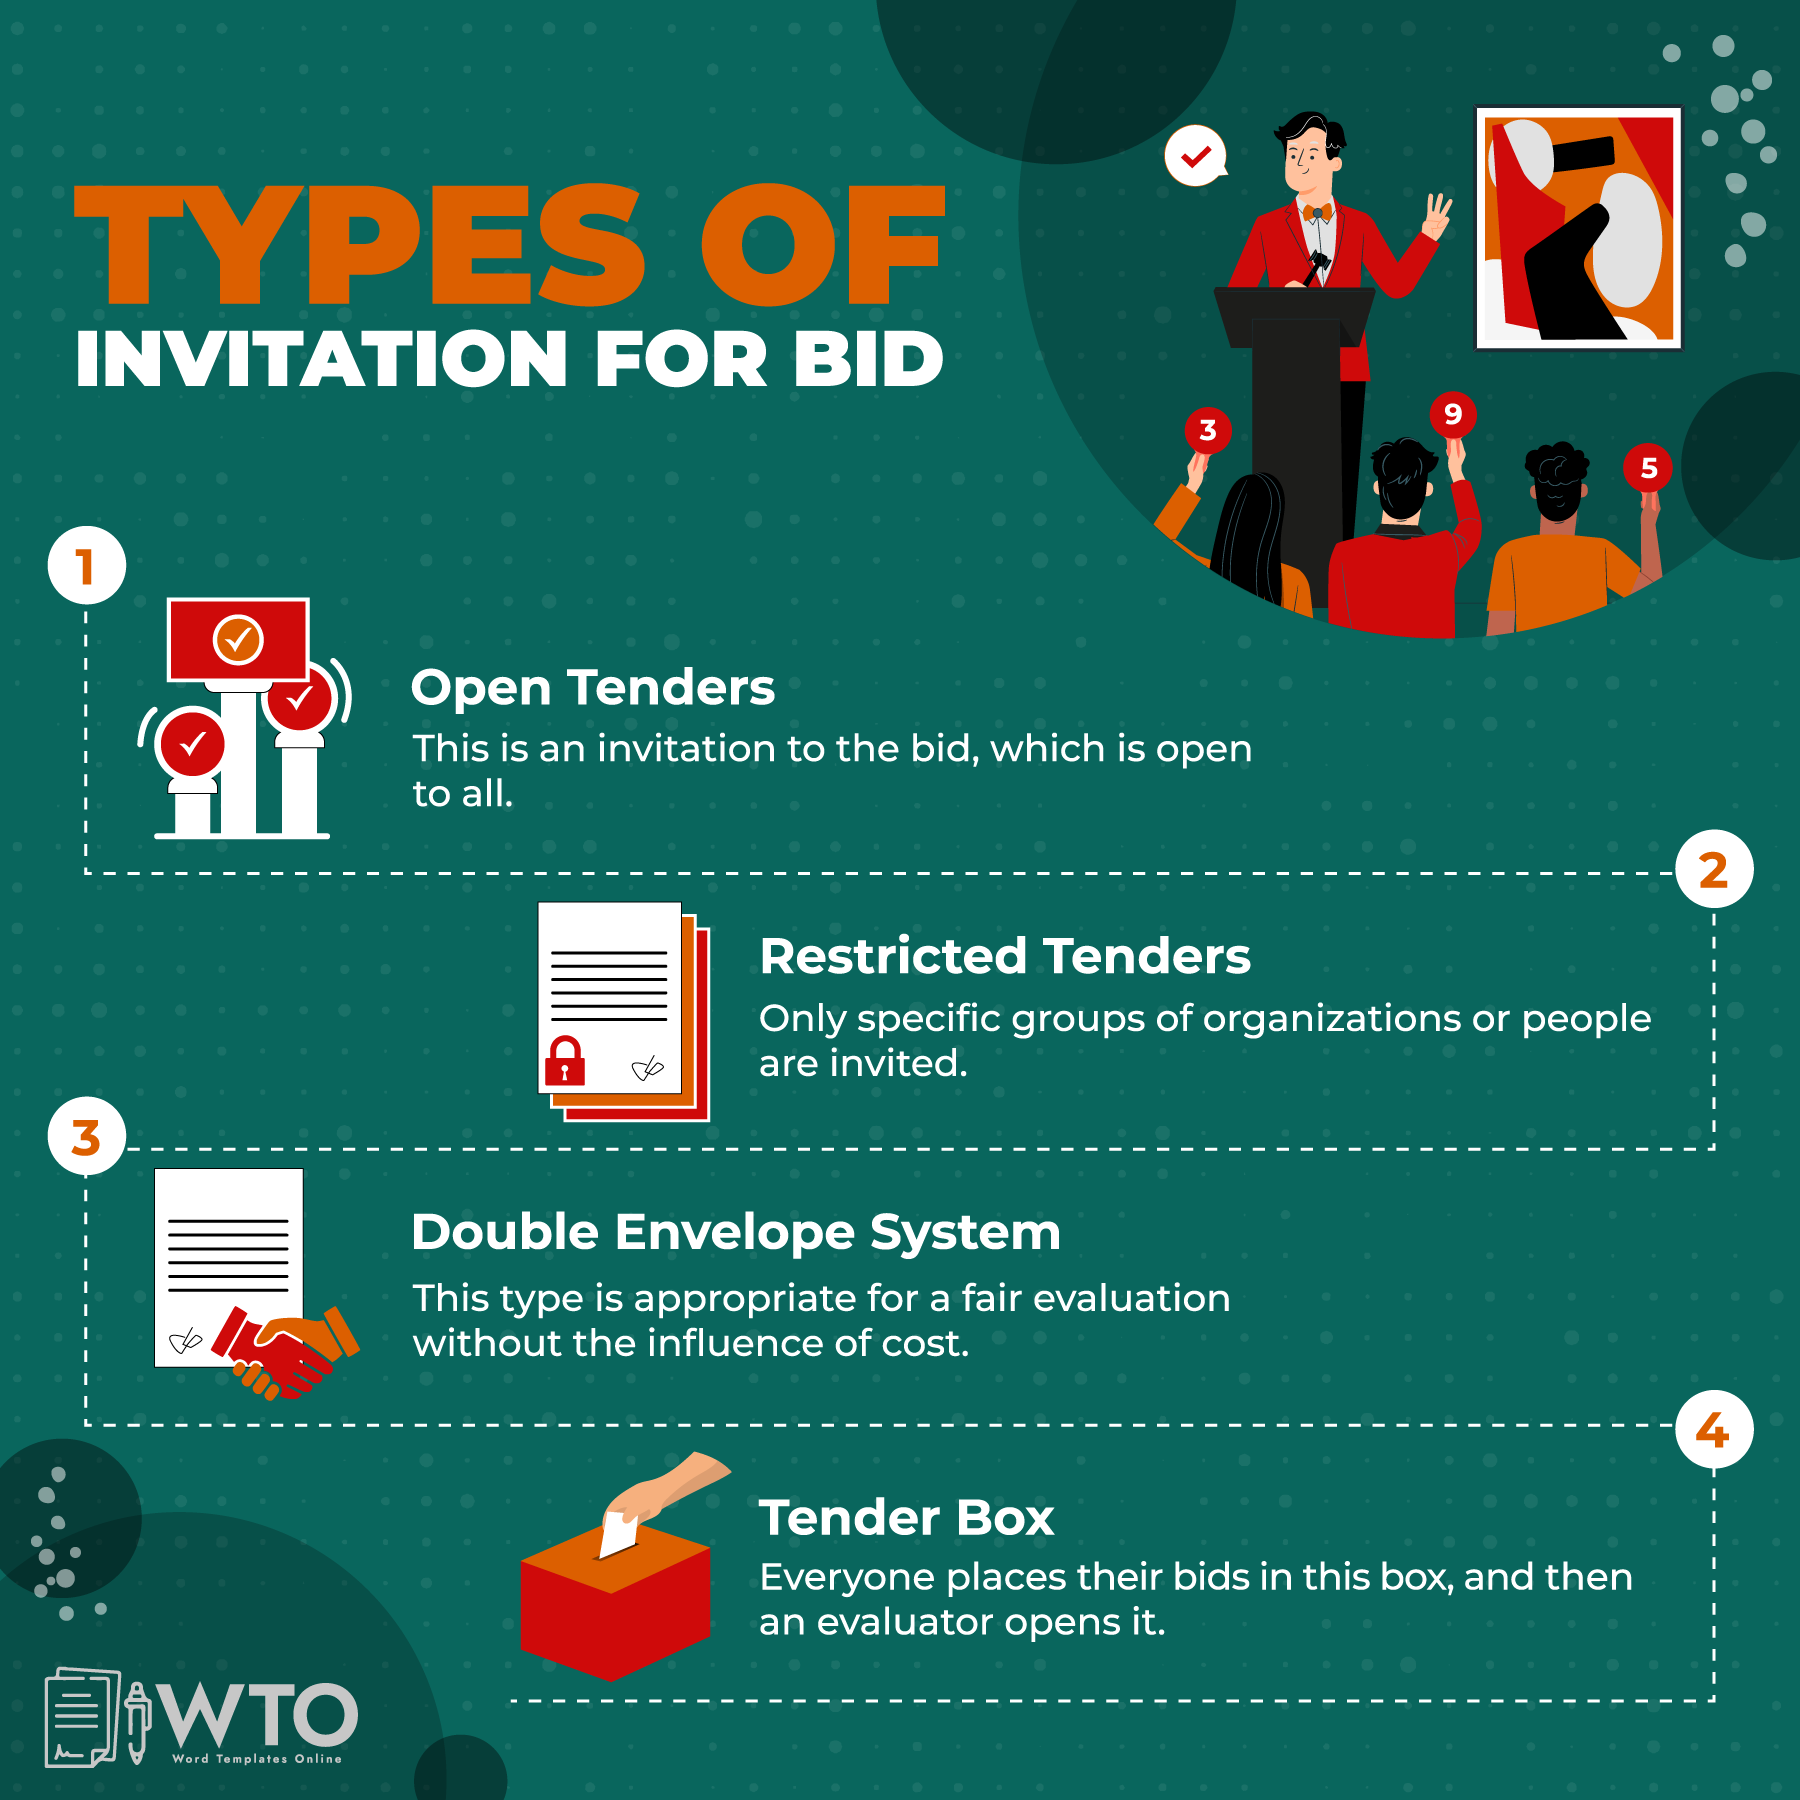 This infographic is about the types of invitation for bid.